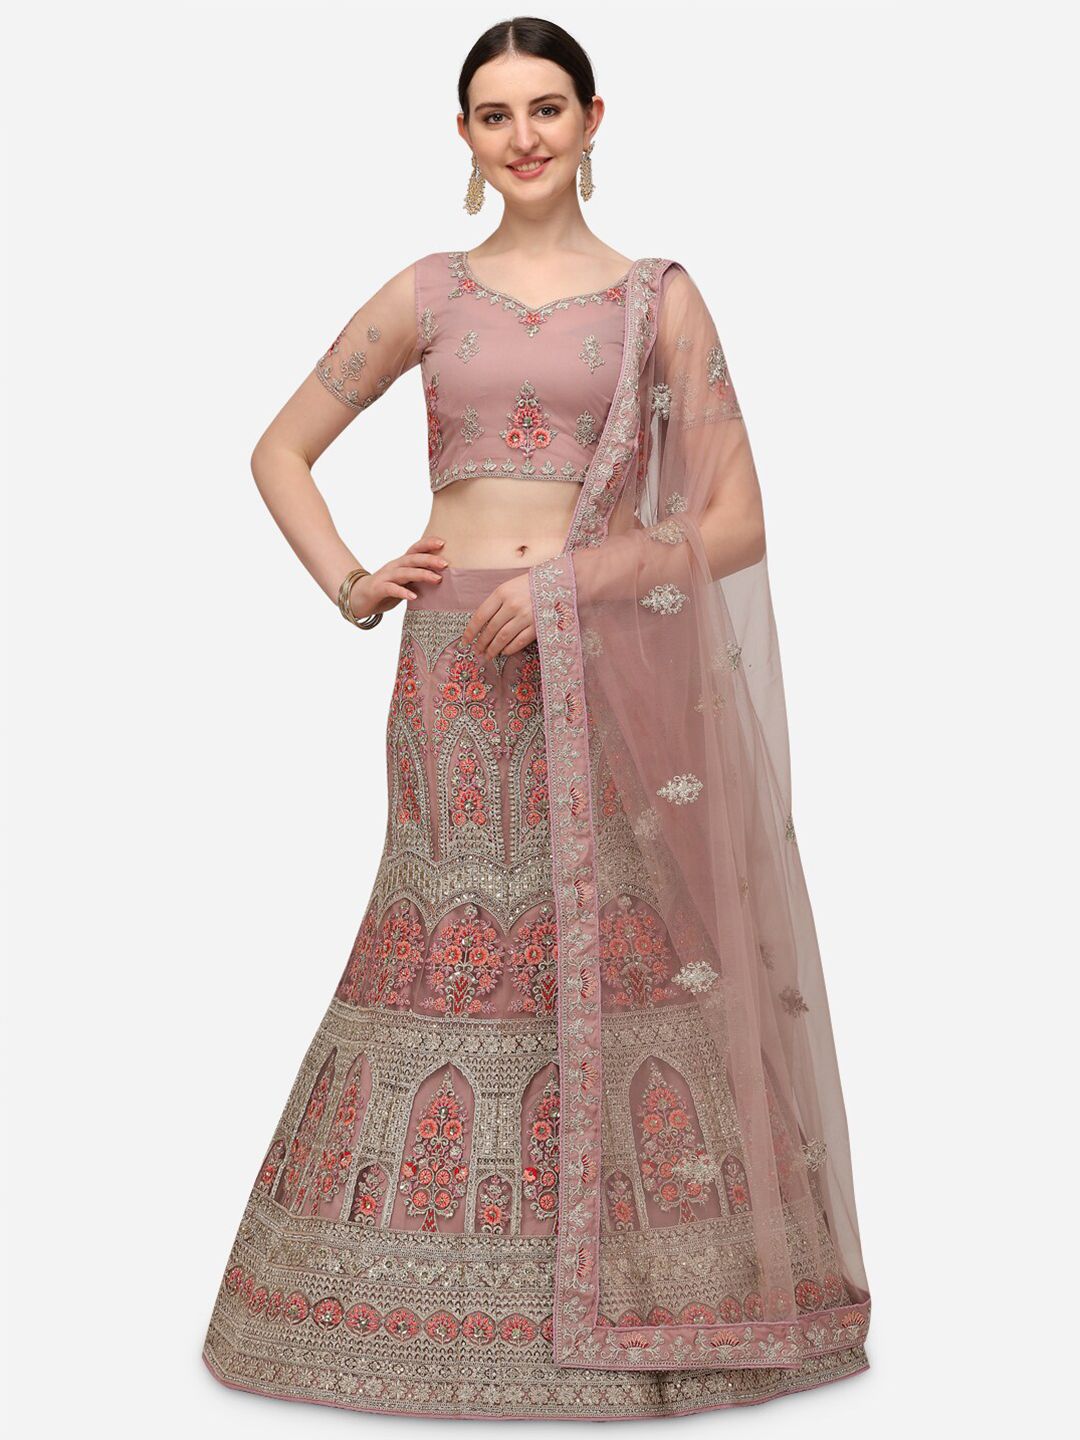 Netram Lavender & Silver-Toned Embroidered Sequinned Semi-Stitched Lehenga & Unstitched Blouse With Dupatta Price in India